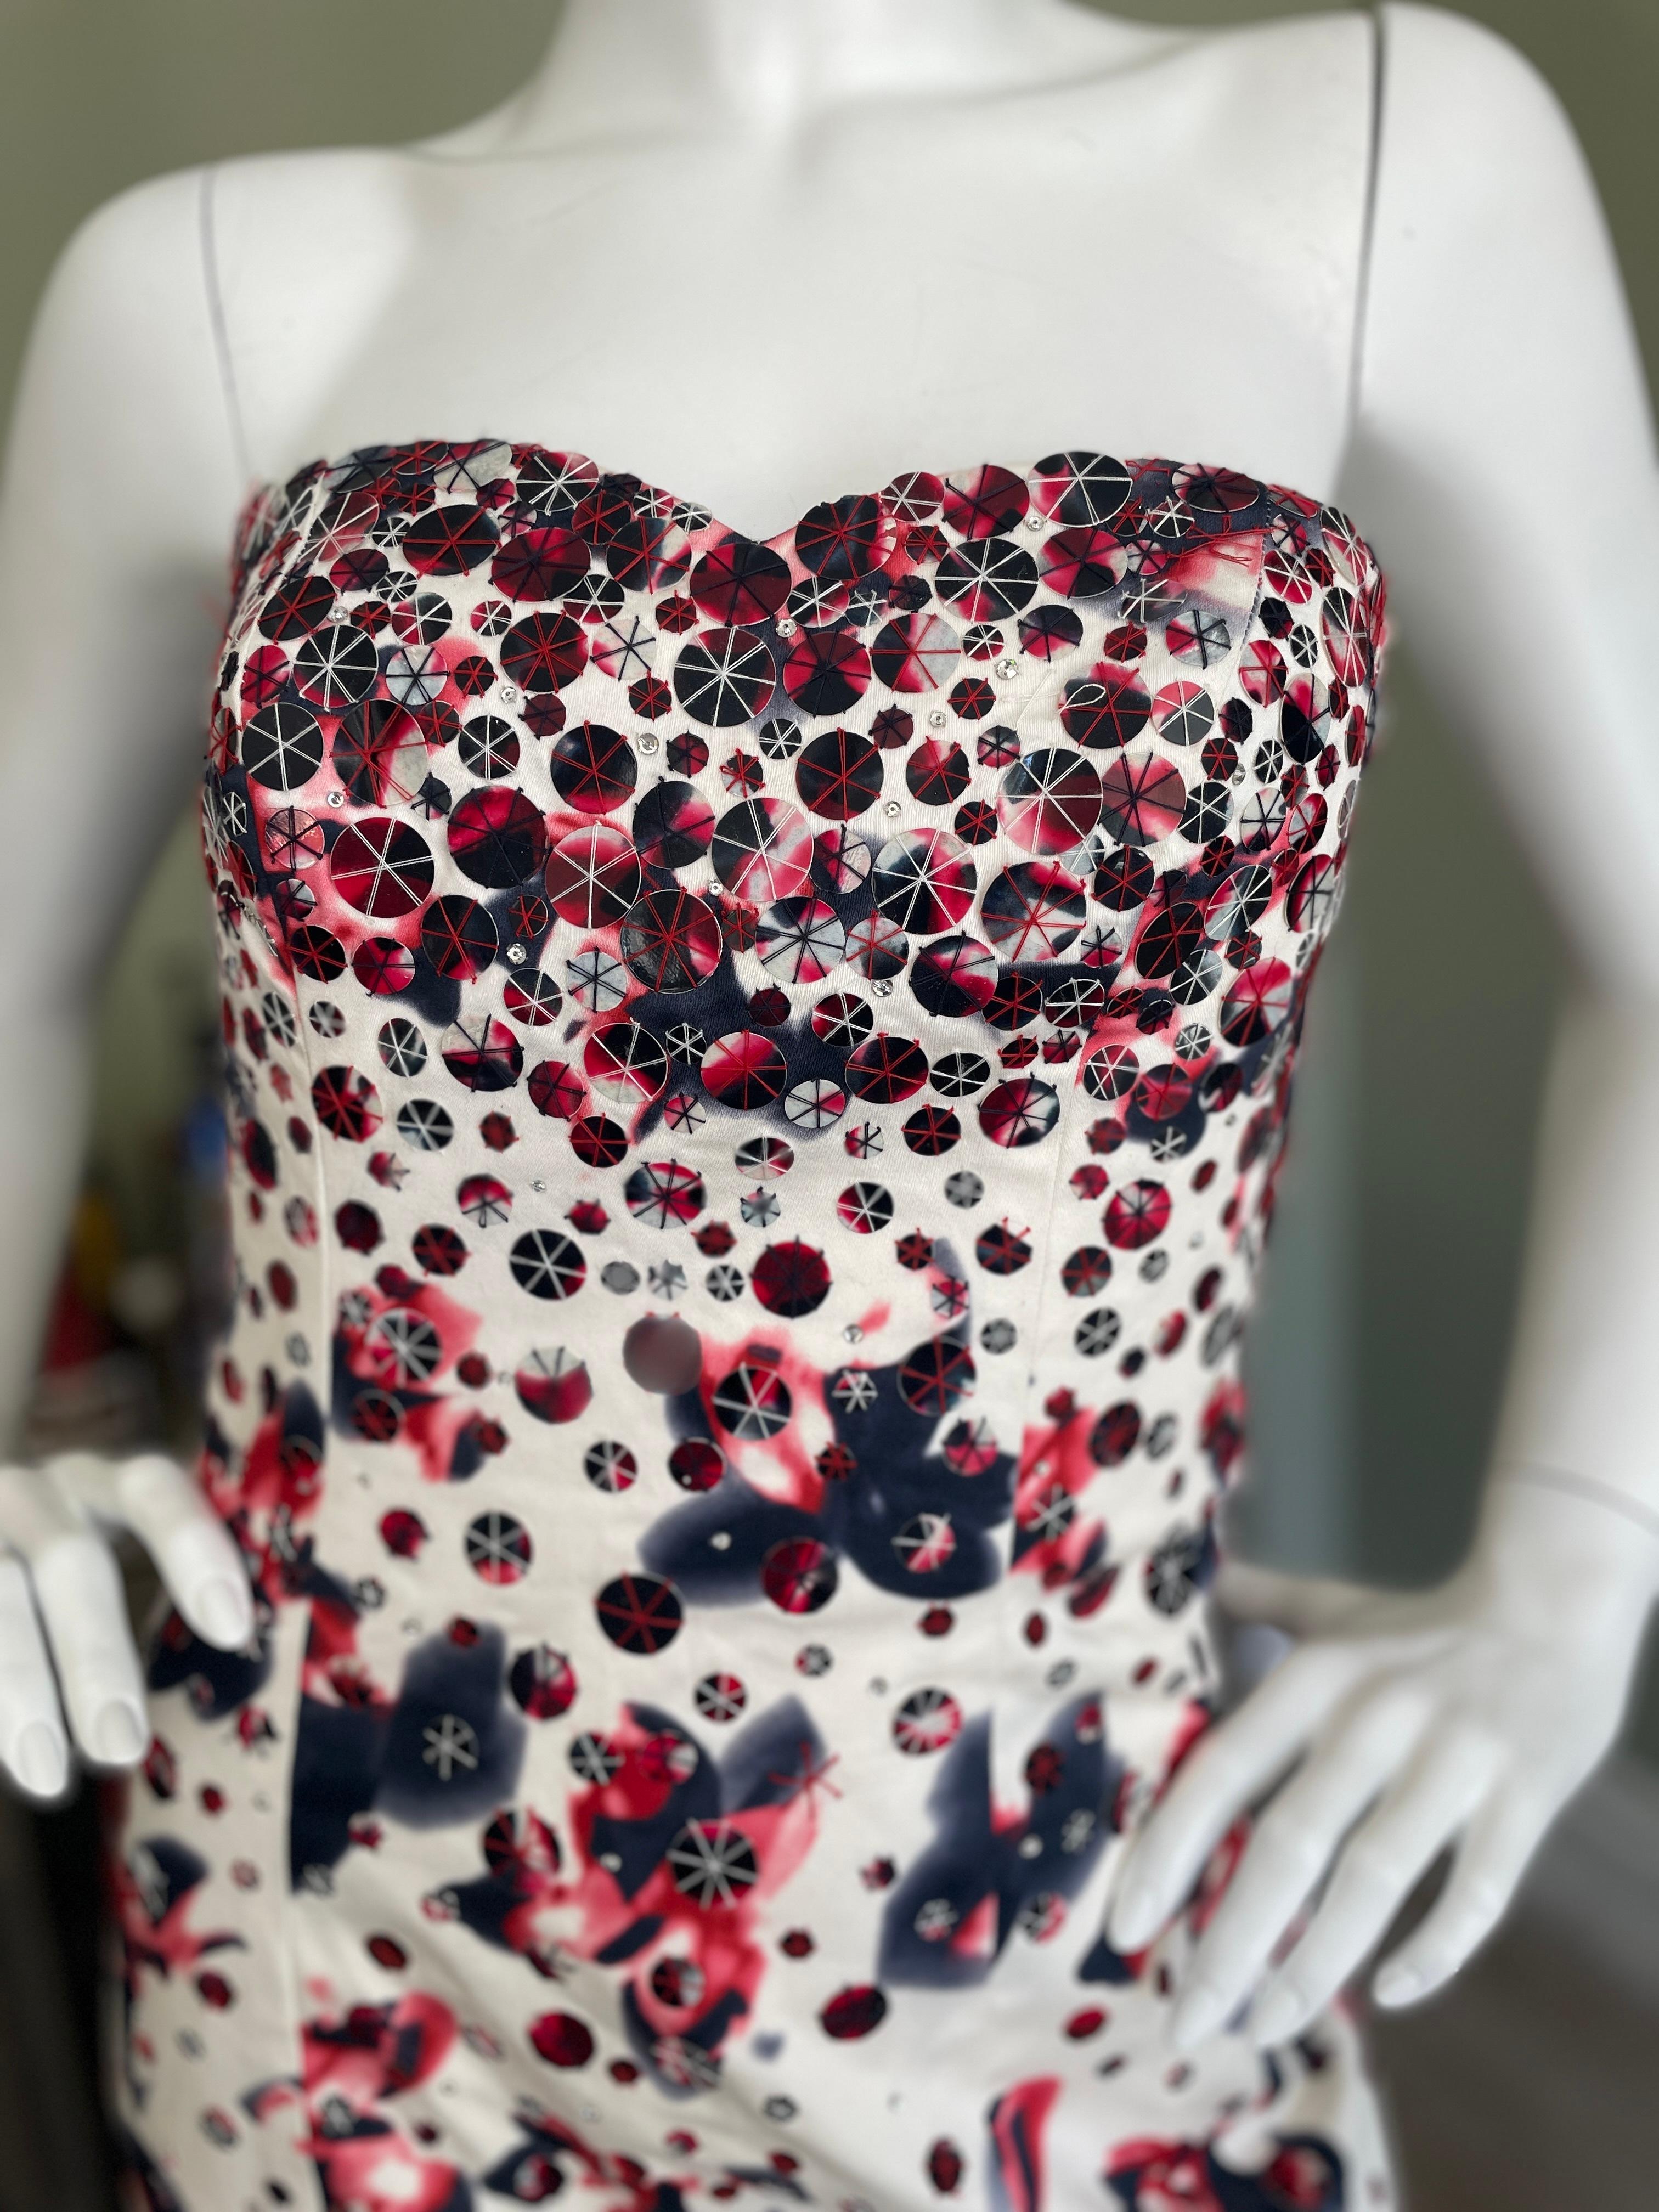 Carolina Herrera Vintage Strapless Floral Embellished Mermaid Dress with Train In Excellent Condition For Sale In Cloverdale, CA